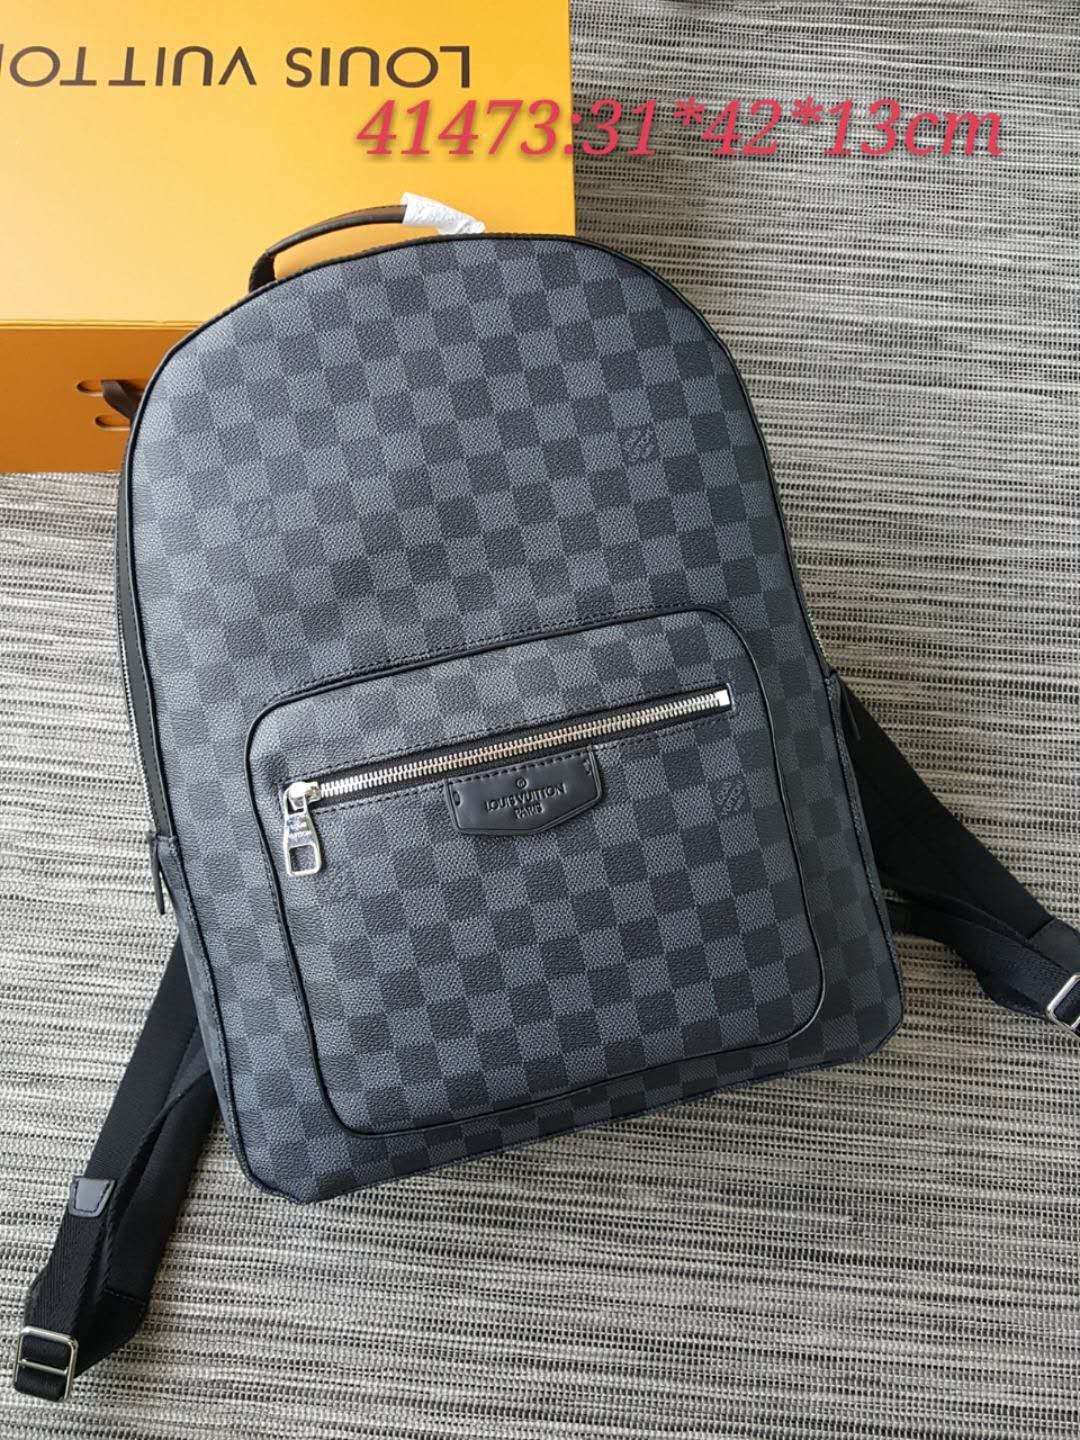 Backpack LV 604 without box Size 31*42*13 cm